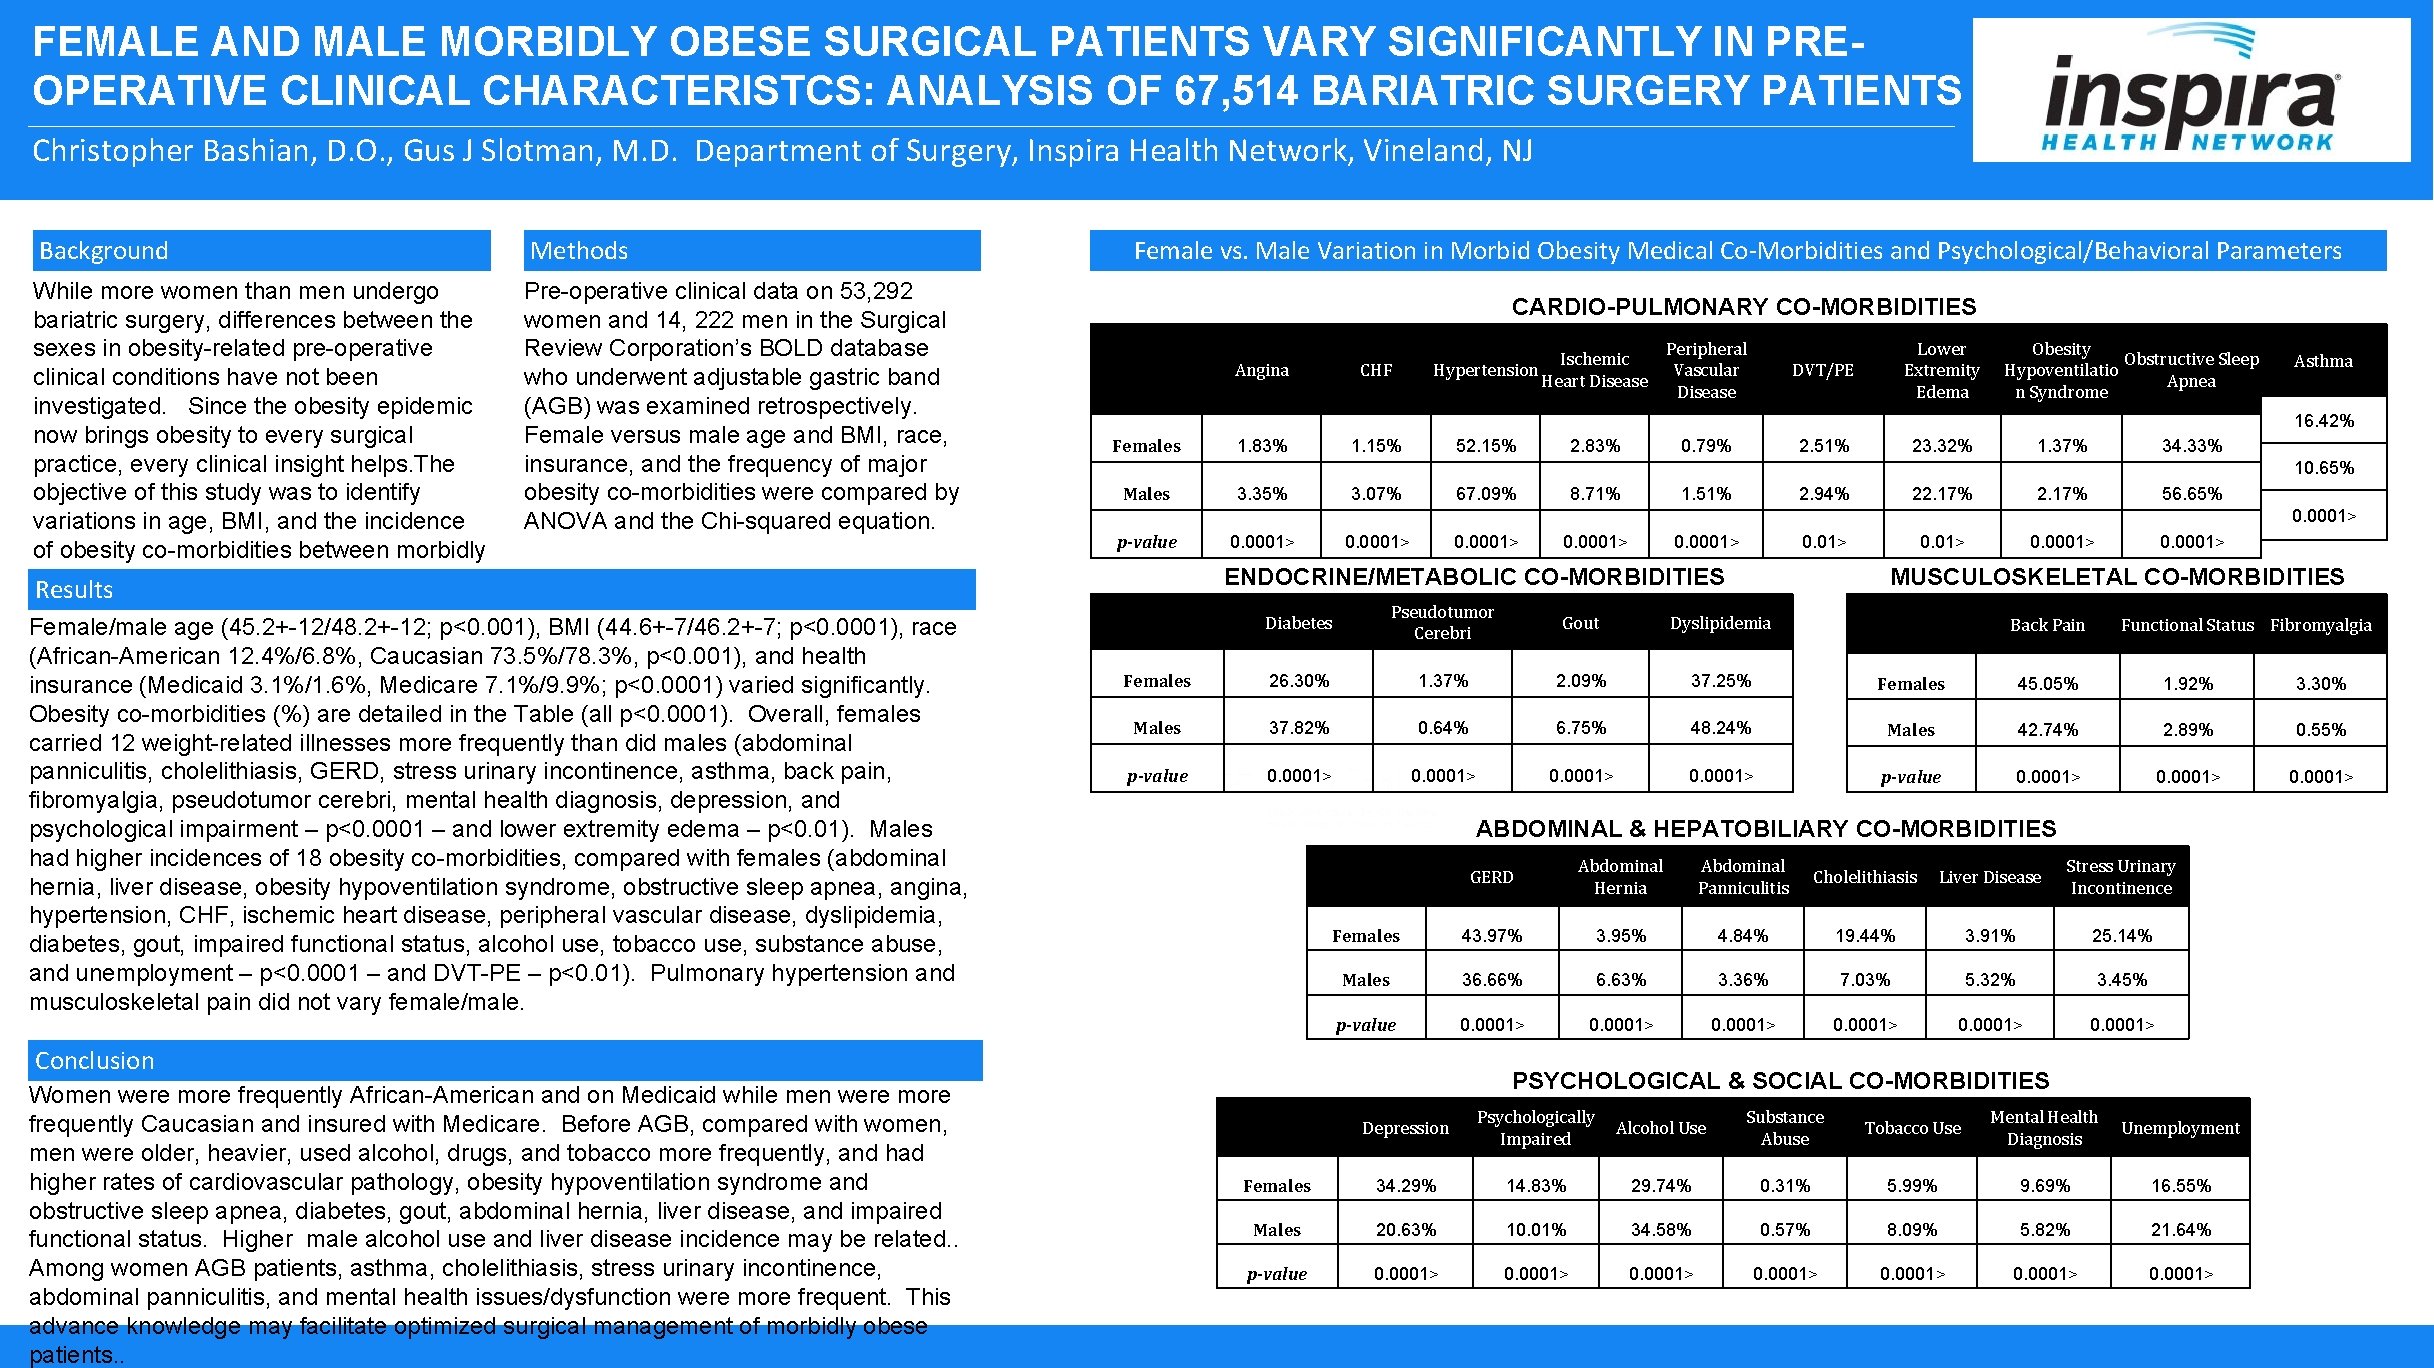 FEMALE AND MALE MORBIDLY OBESE SURGICAL PATIENTS VARY SIGNIFICANTLY IN PREOPERATIVE CLINICAL CHARACTERISTCS: ANALYSIS